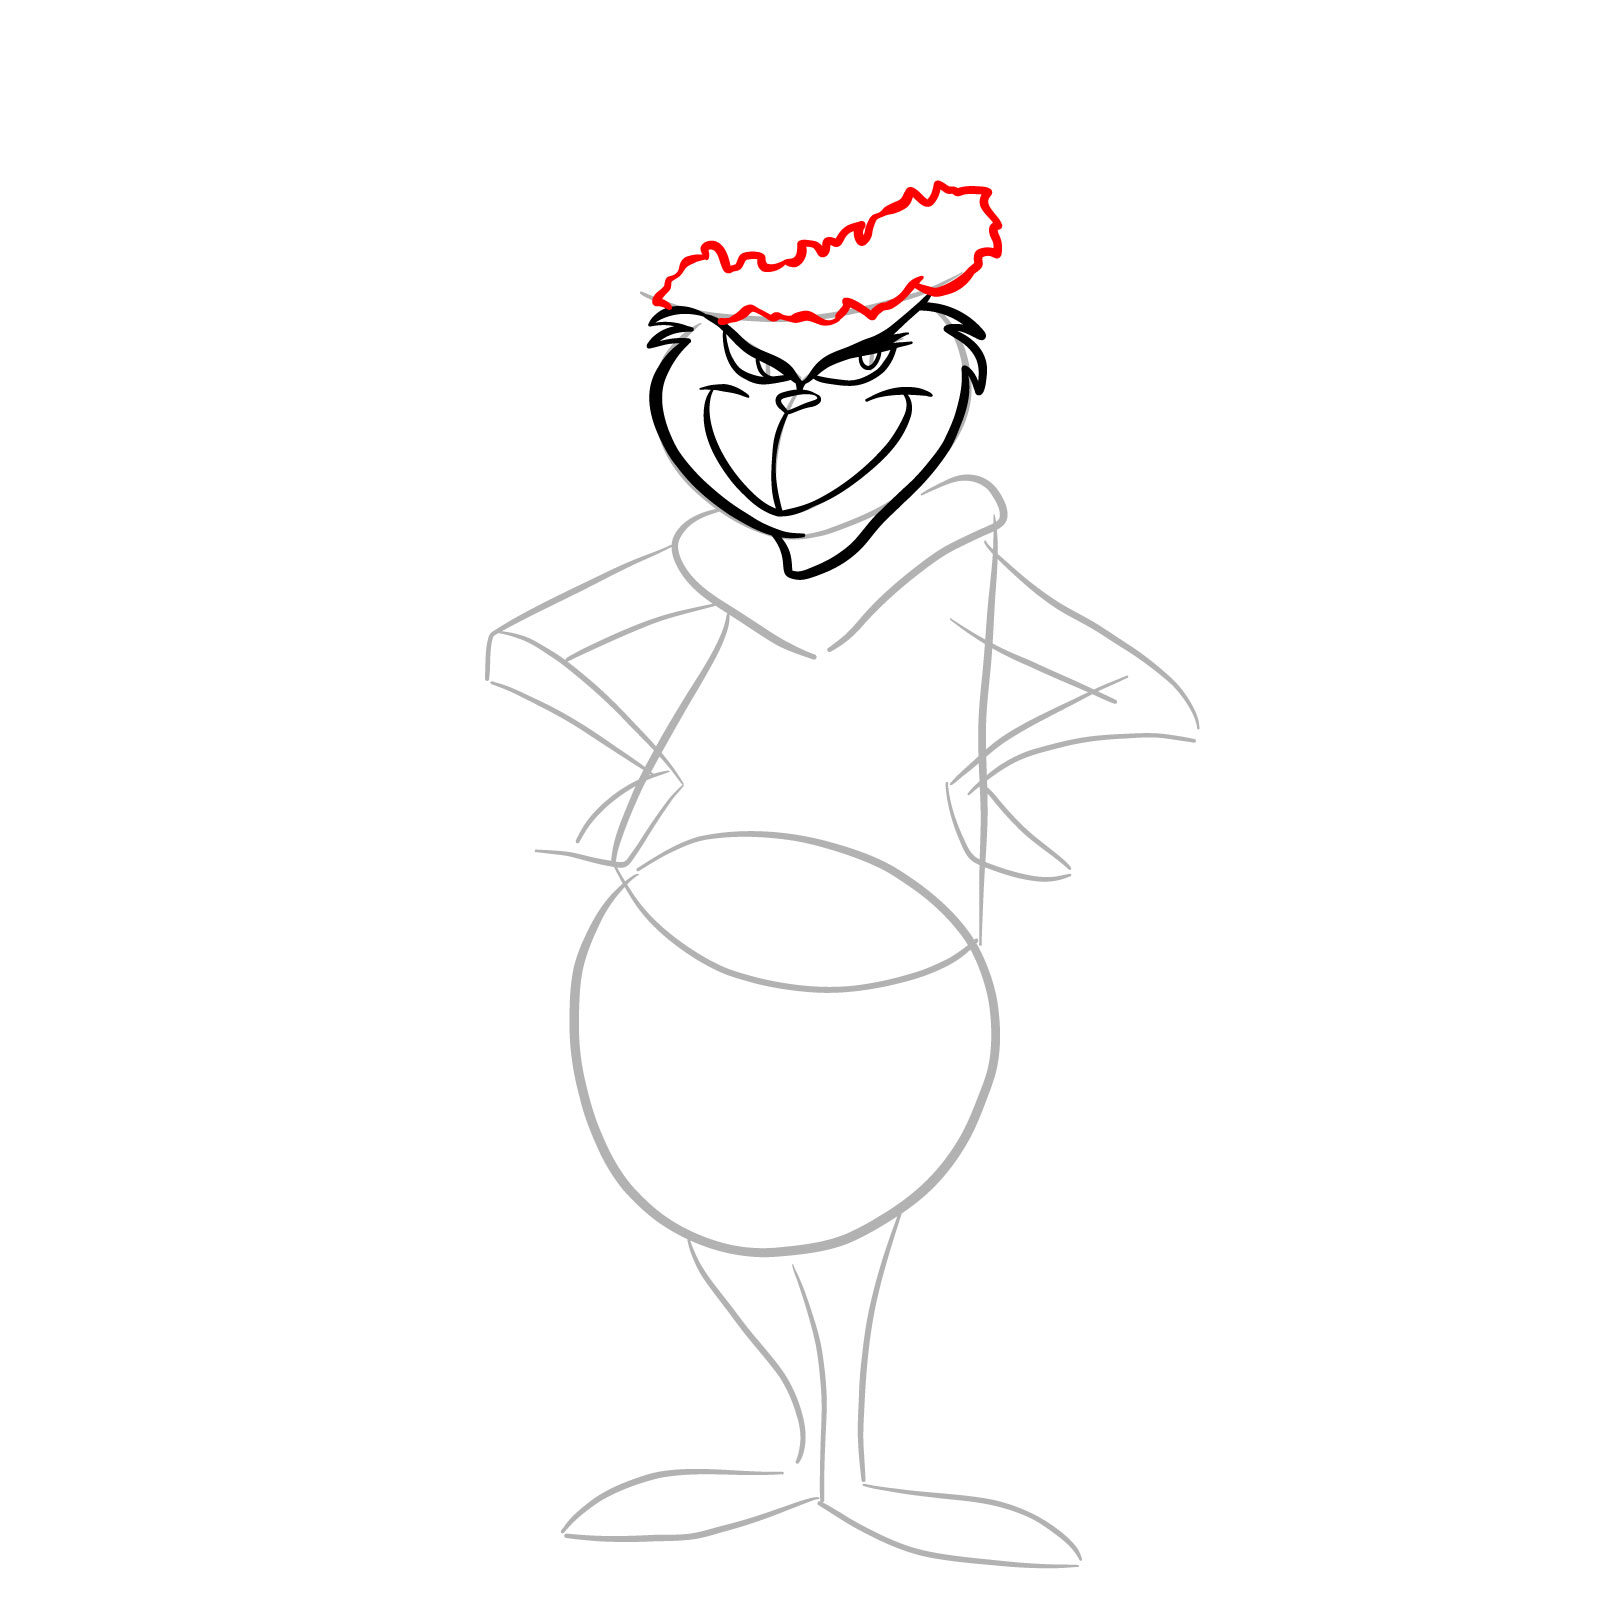 How to draw The Grinch in a Christmas costume - step 09